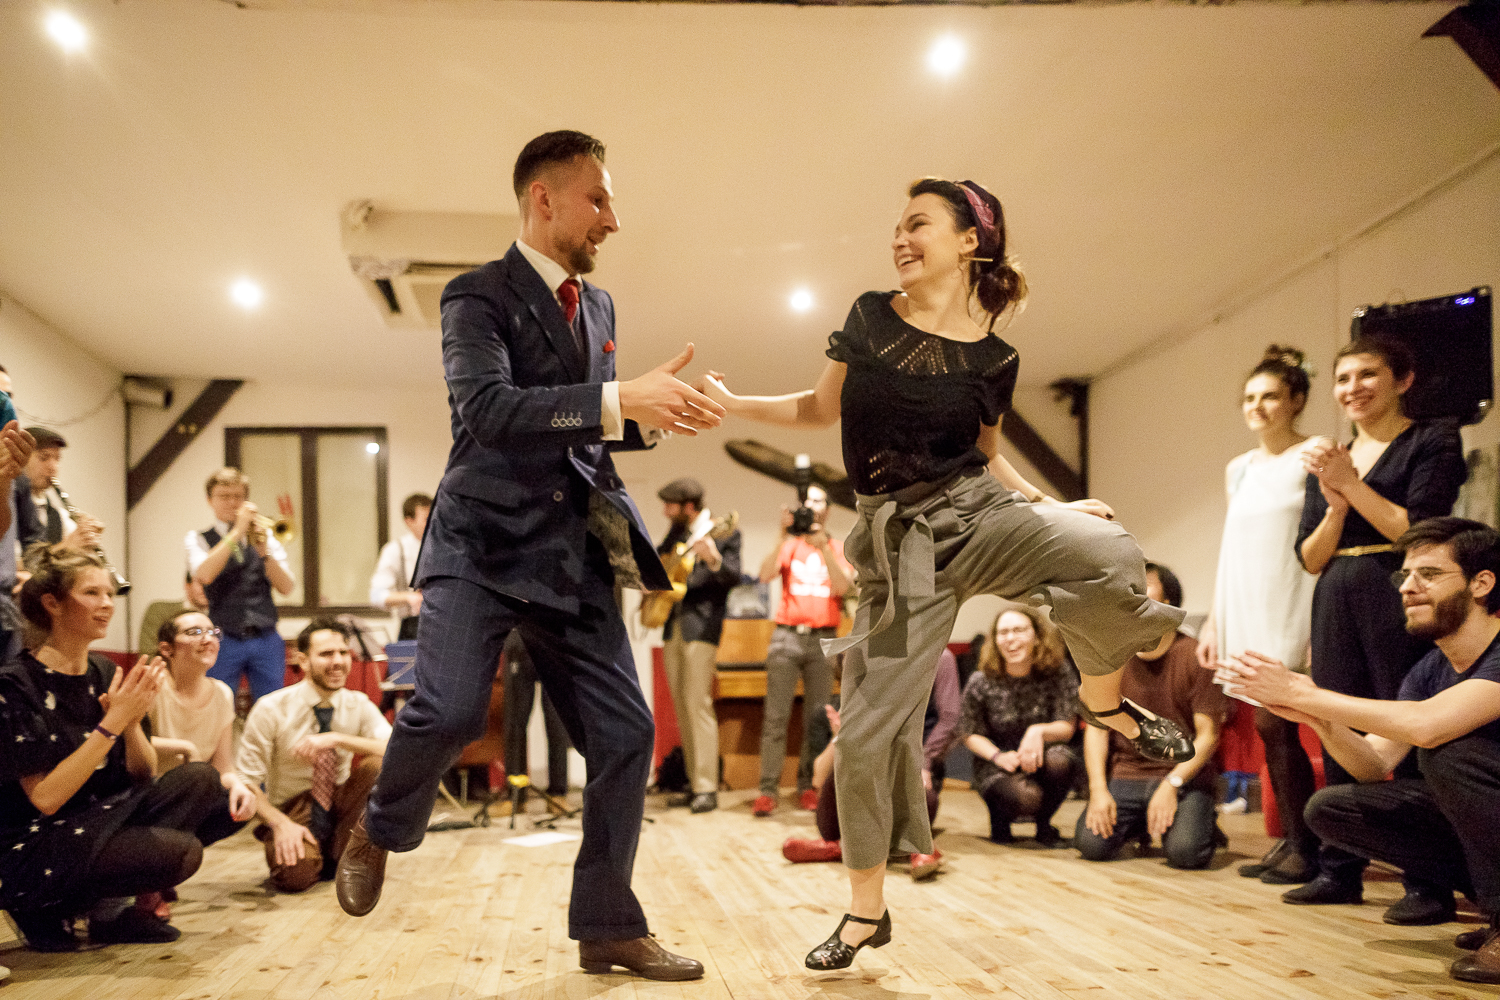  Paris Swing Workshop 2018, Saturday Night Party with the Jacks'&'Jills - Photo Credit: For Dancers Only (http://d.pr/1fEEY) - http://www.ebobrie.com/paris-swing-workshop-27012018-au-chantier 